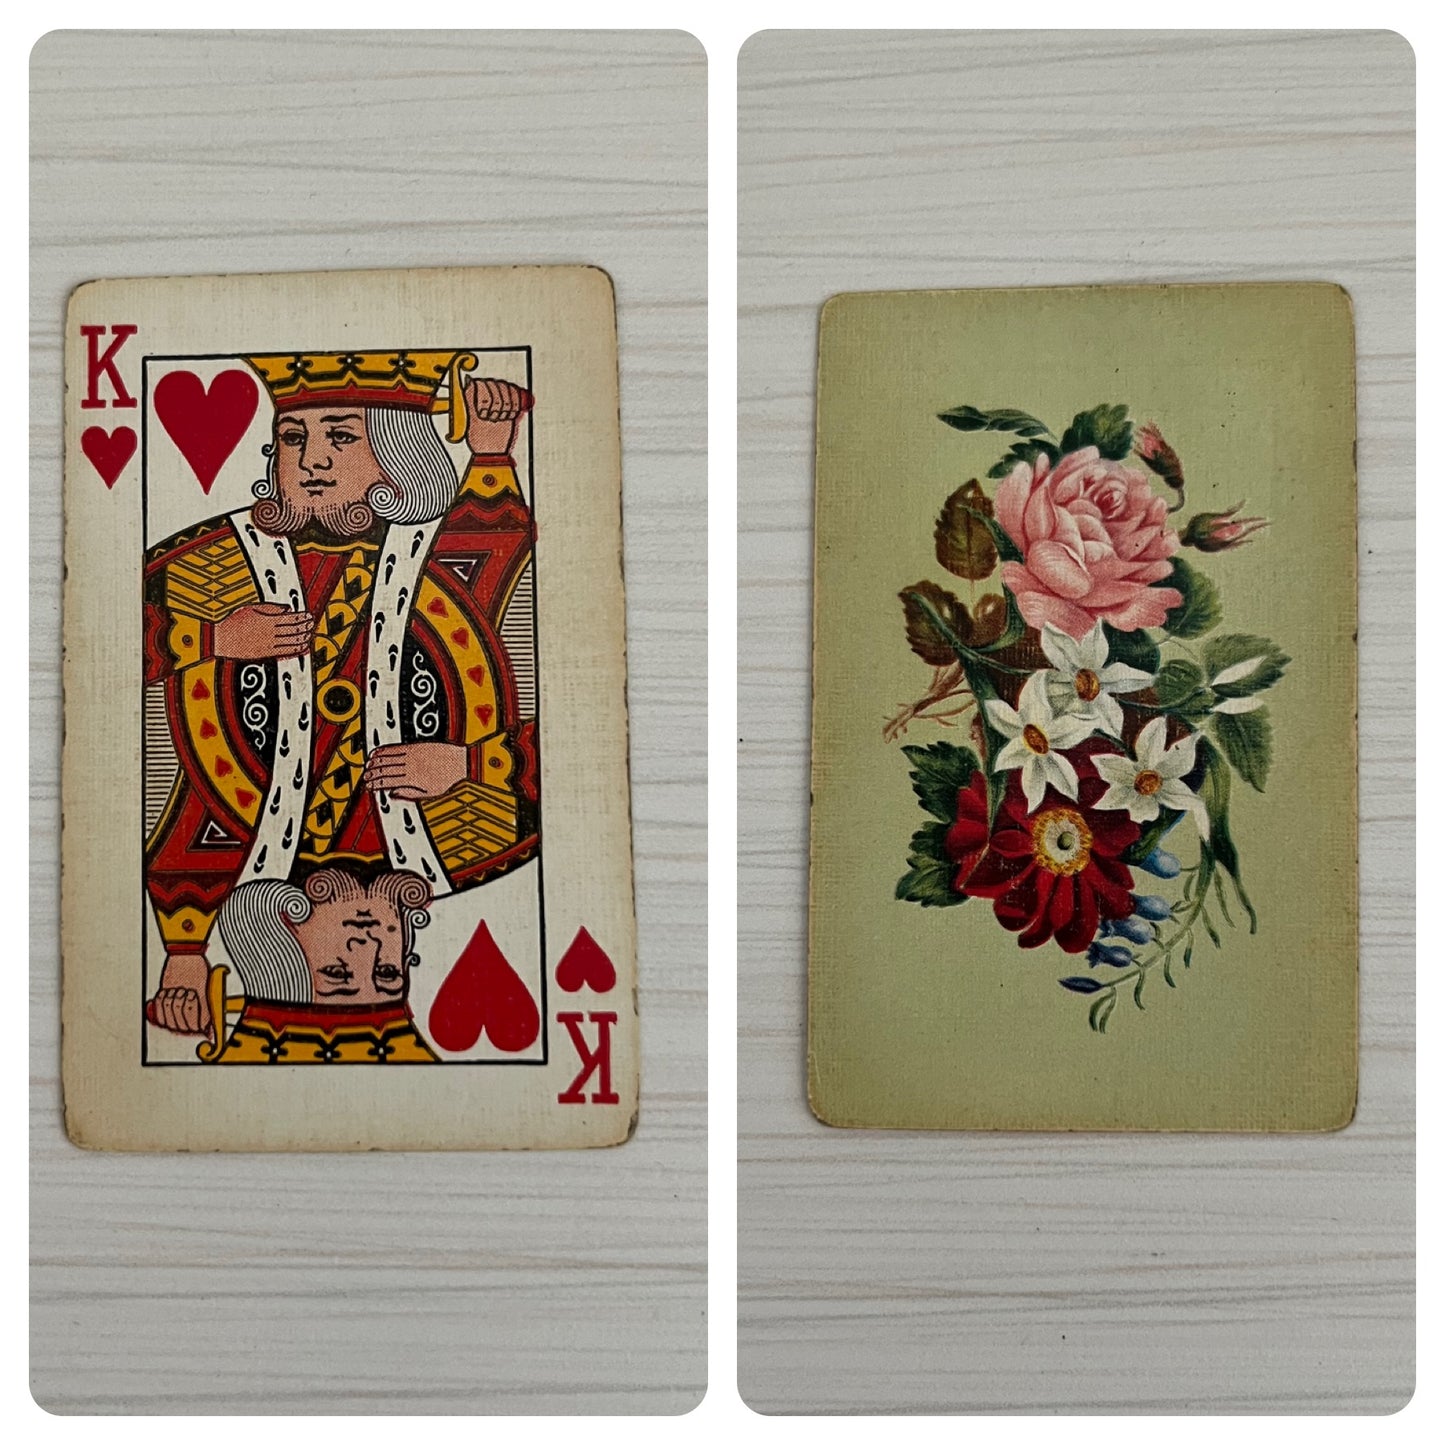 Vintage Gold Color Frame with Oval Opening - Antique Playing Card with Roses Bouquet Design